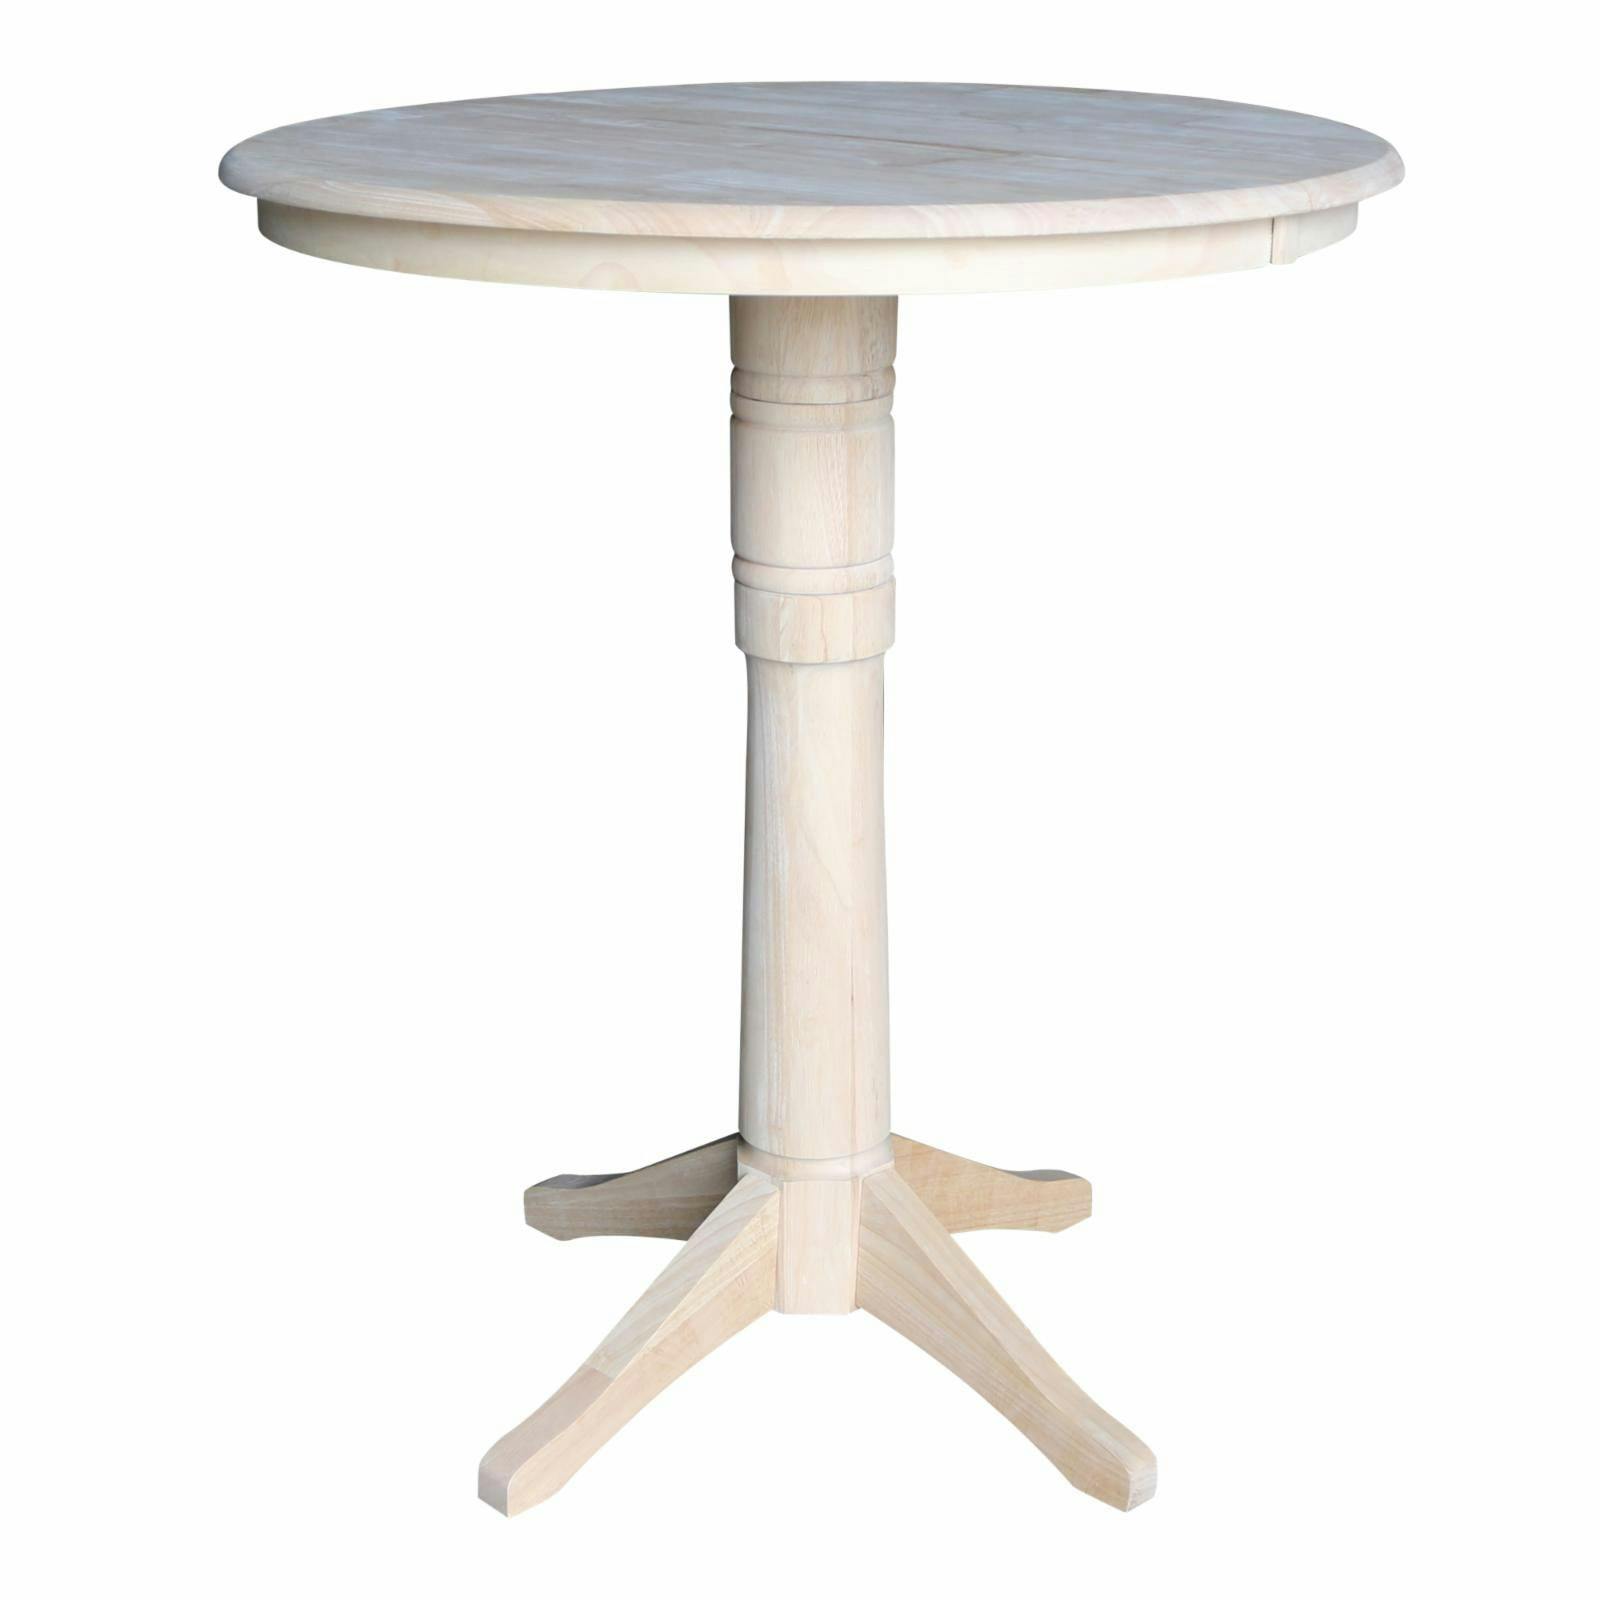 Elegant 36" Round Extendable Bar Height Wood Table with Leaf